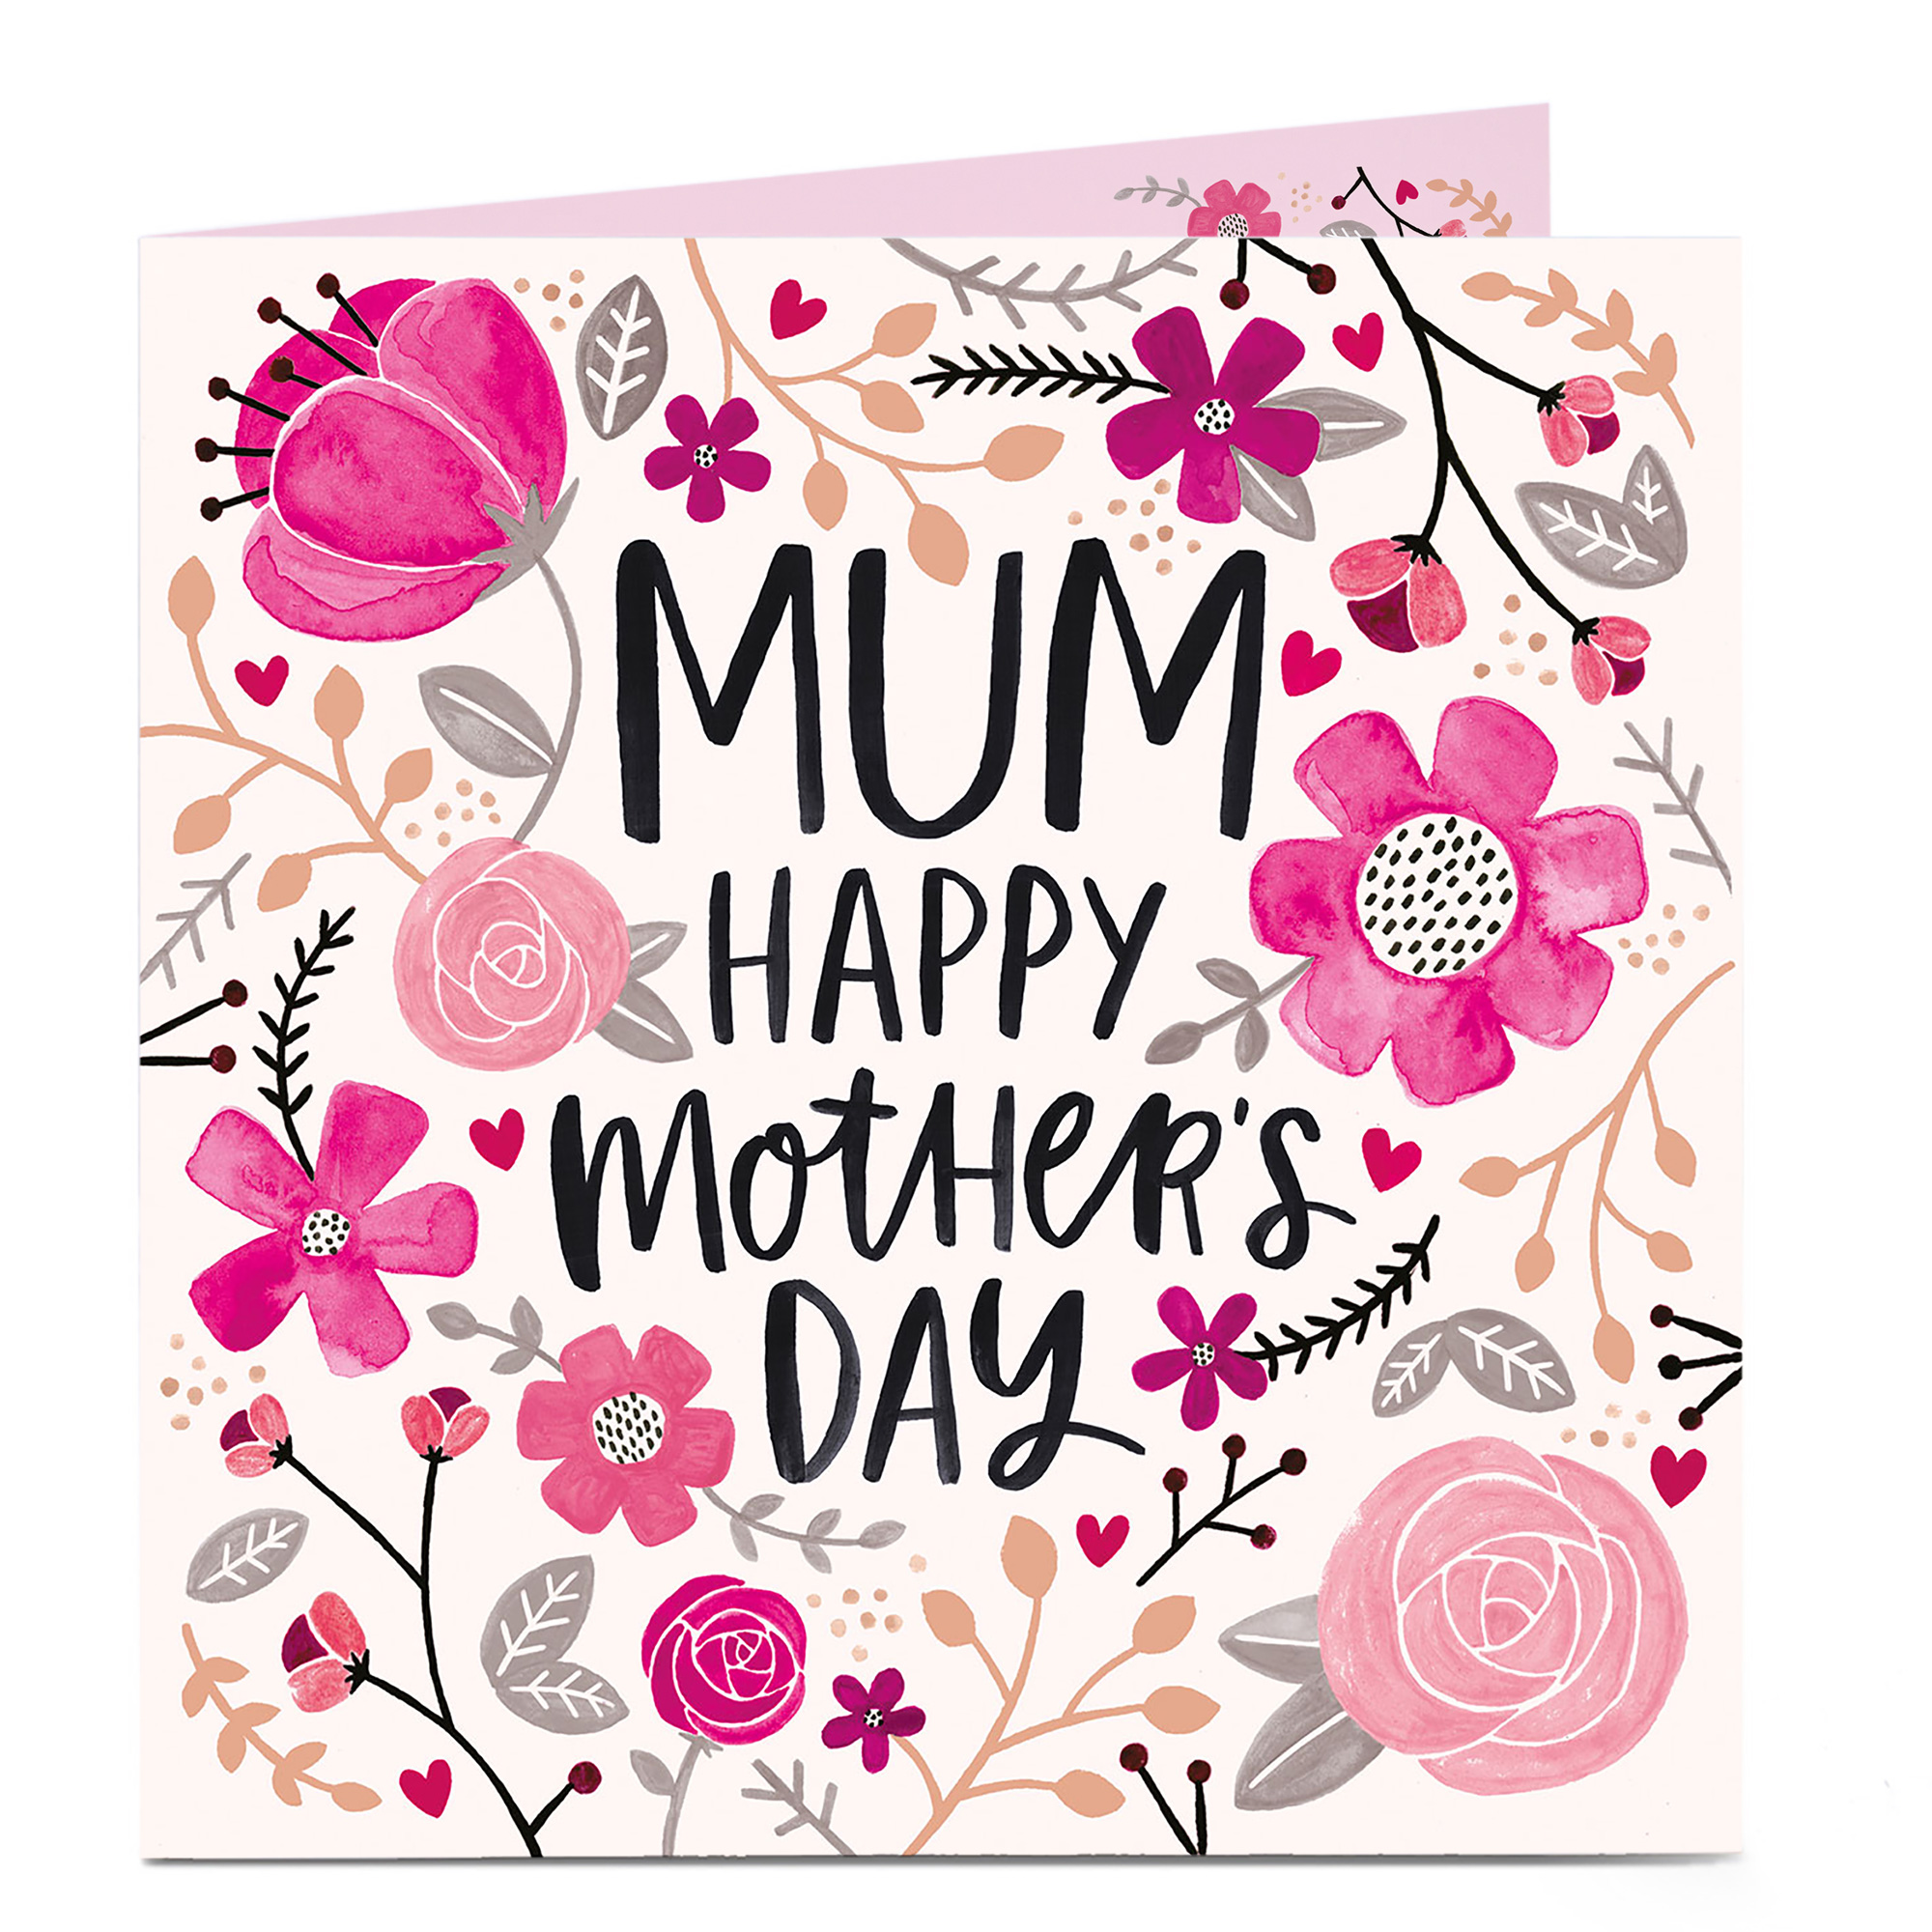 Mother's Day Photo Cards We Make Mother's Day Cards KALAMBAKA